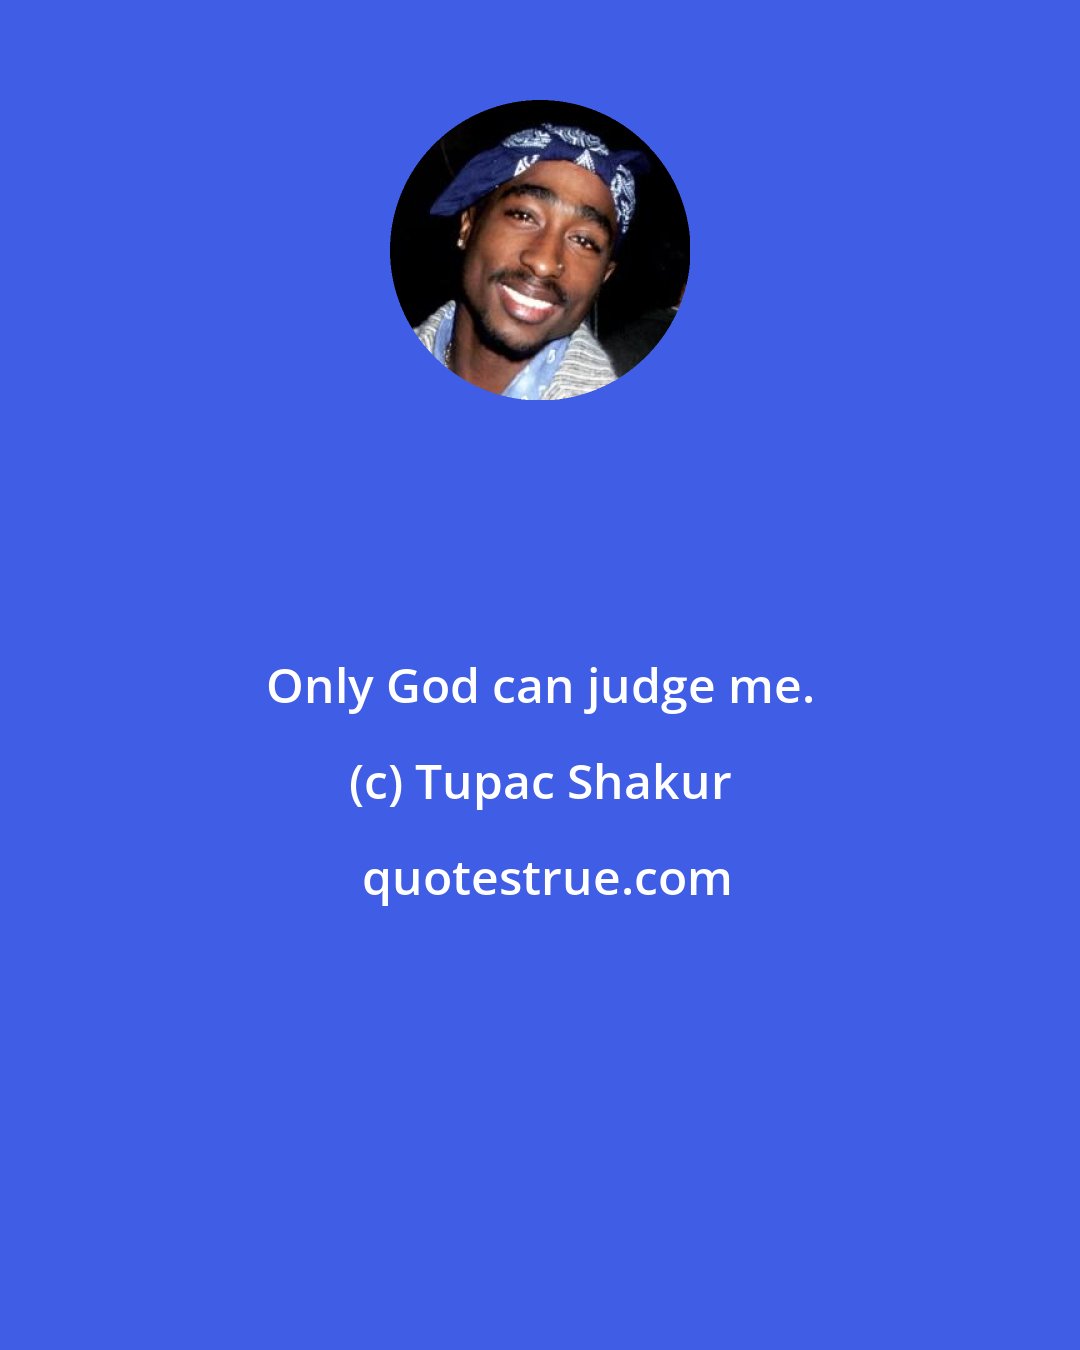 Tupac Shakur: Only God can judge me.